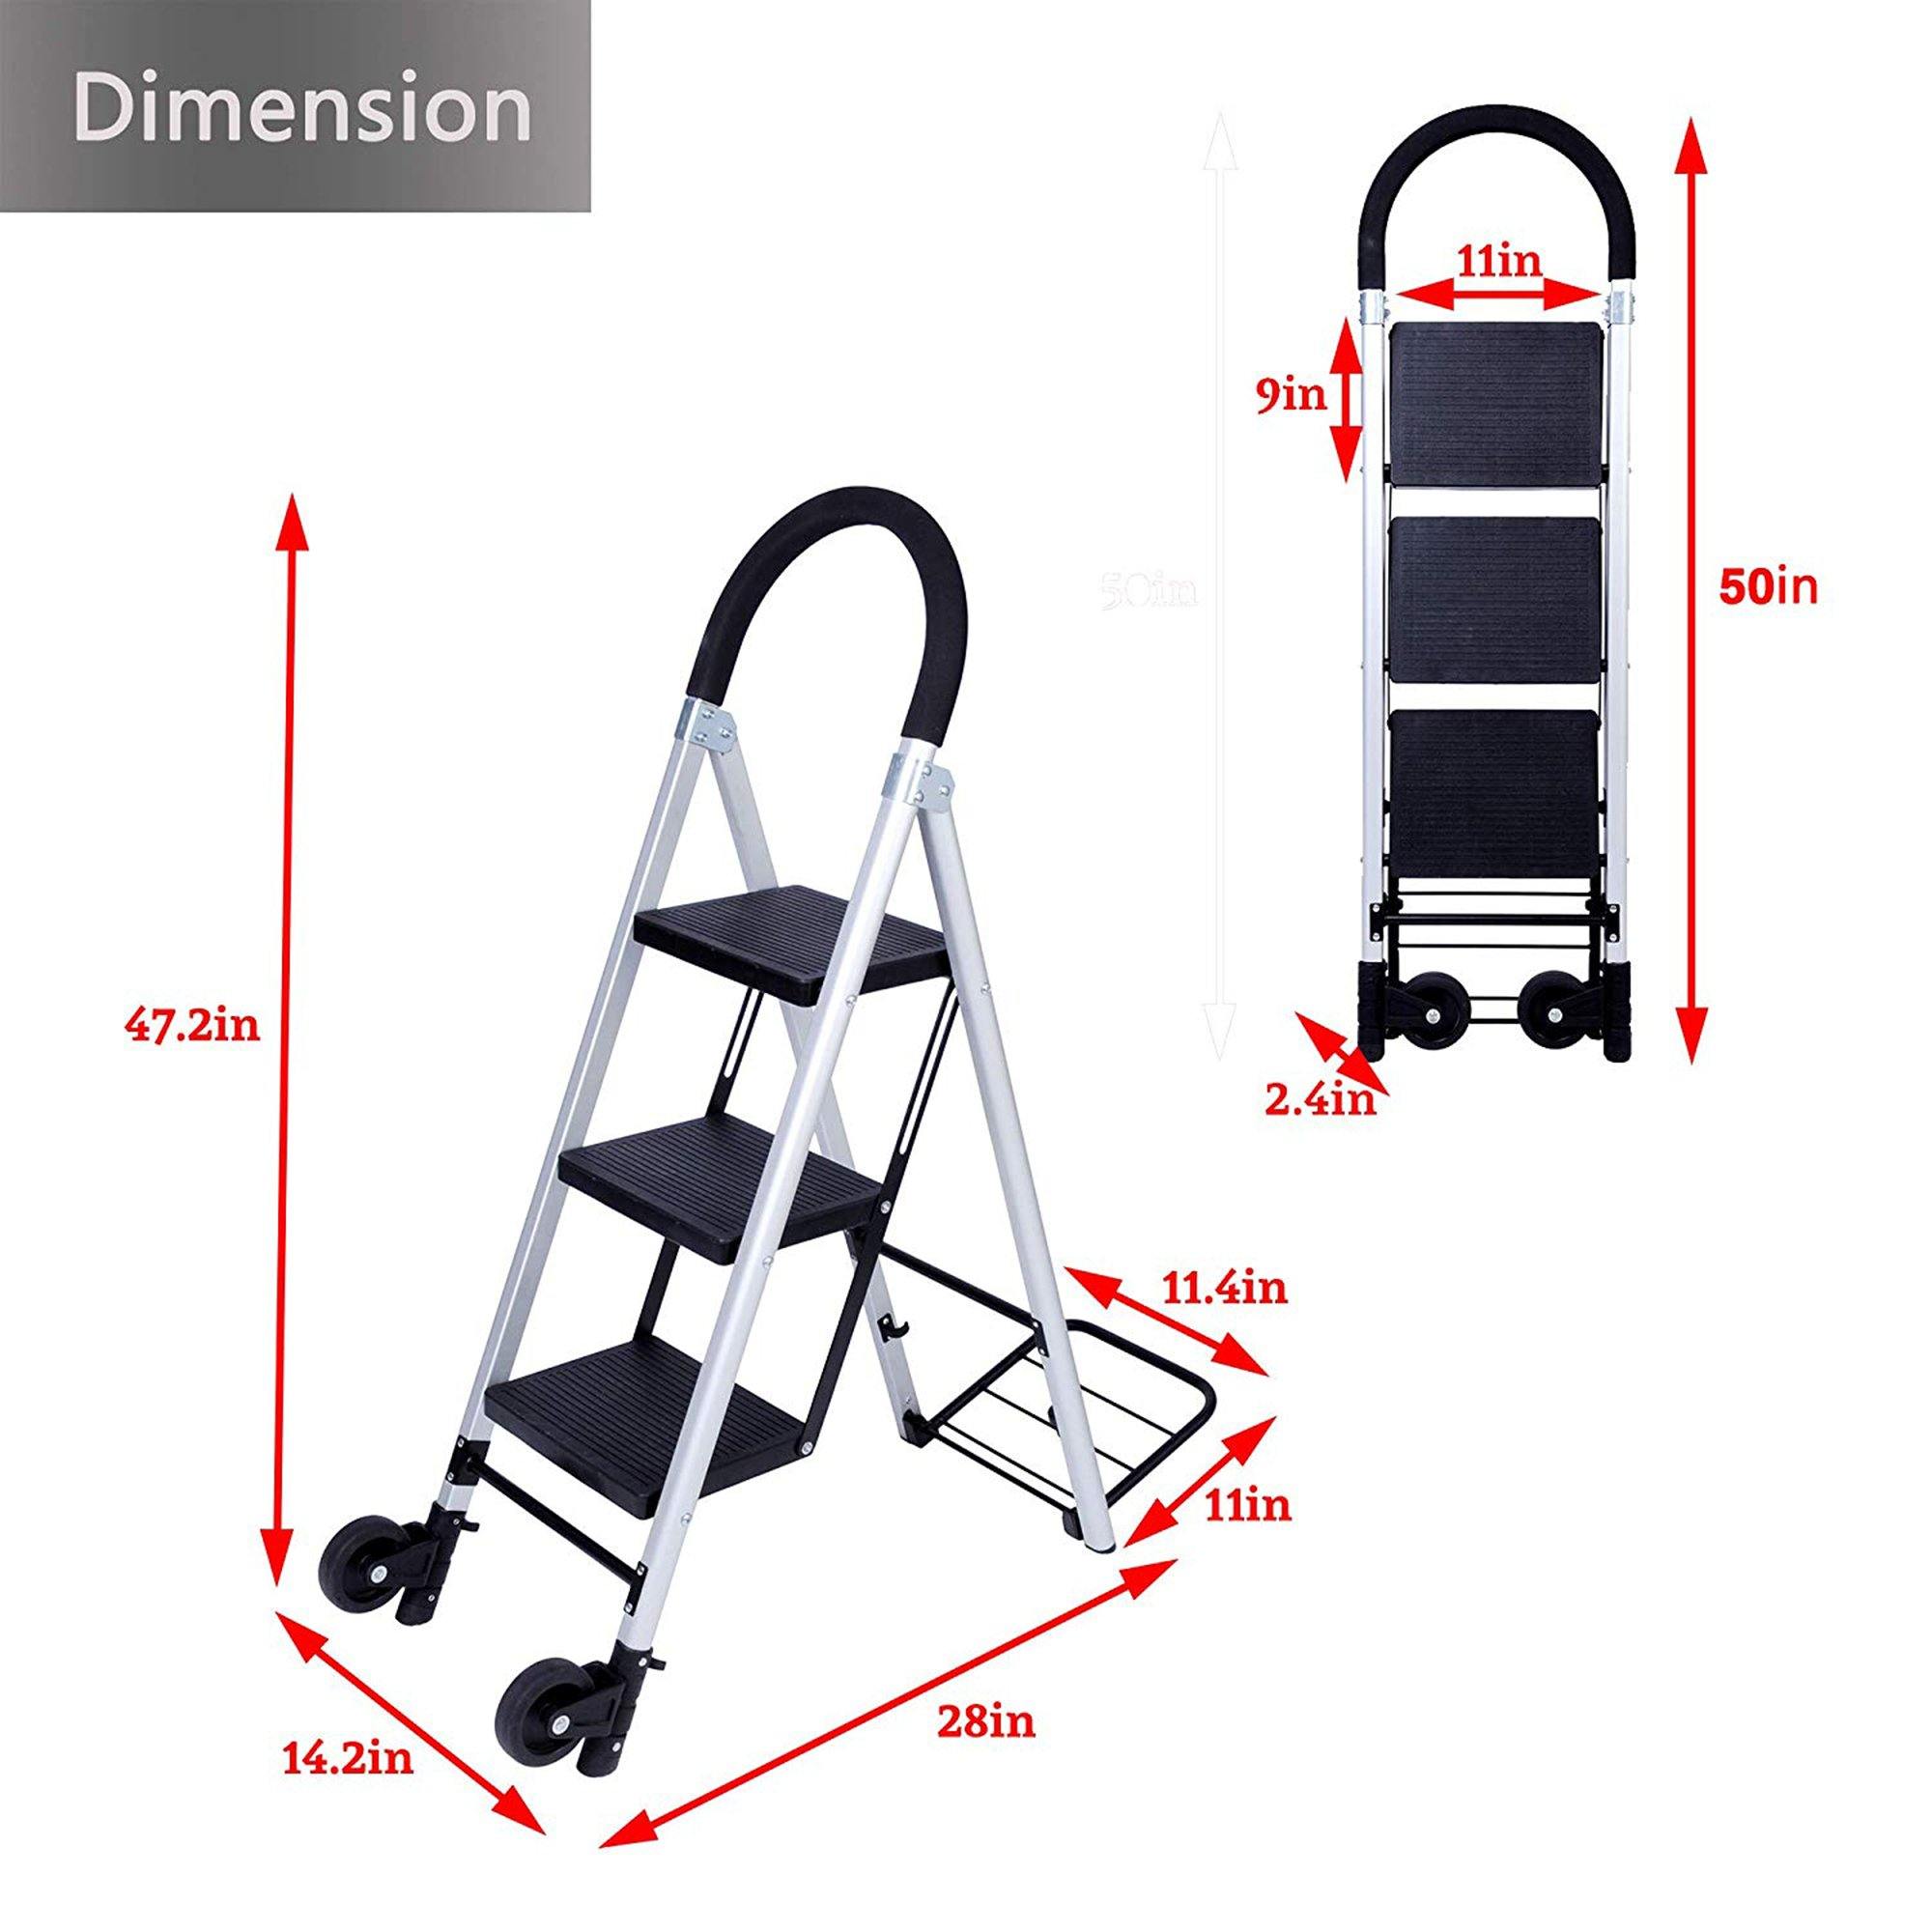 3 Step Ladder Folding Hand Truck 2 in 1 Convertible Aluminum Ladders with Wheels for Home Office - Bosonshop